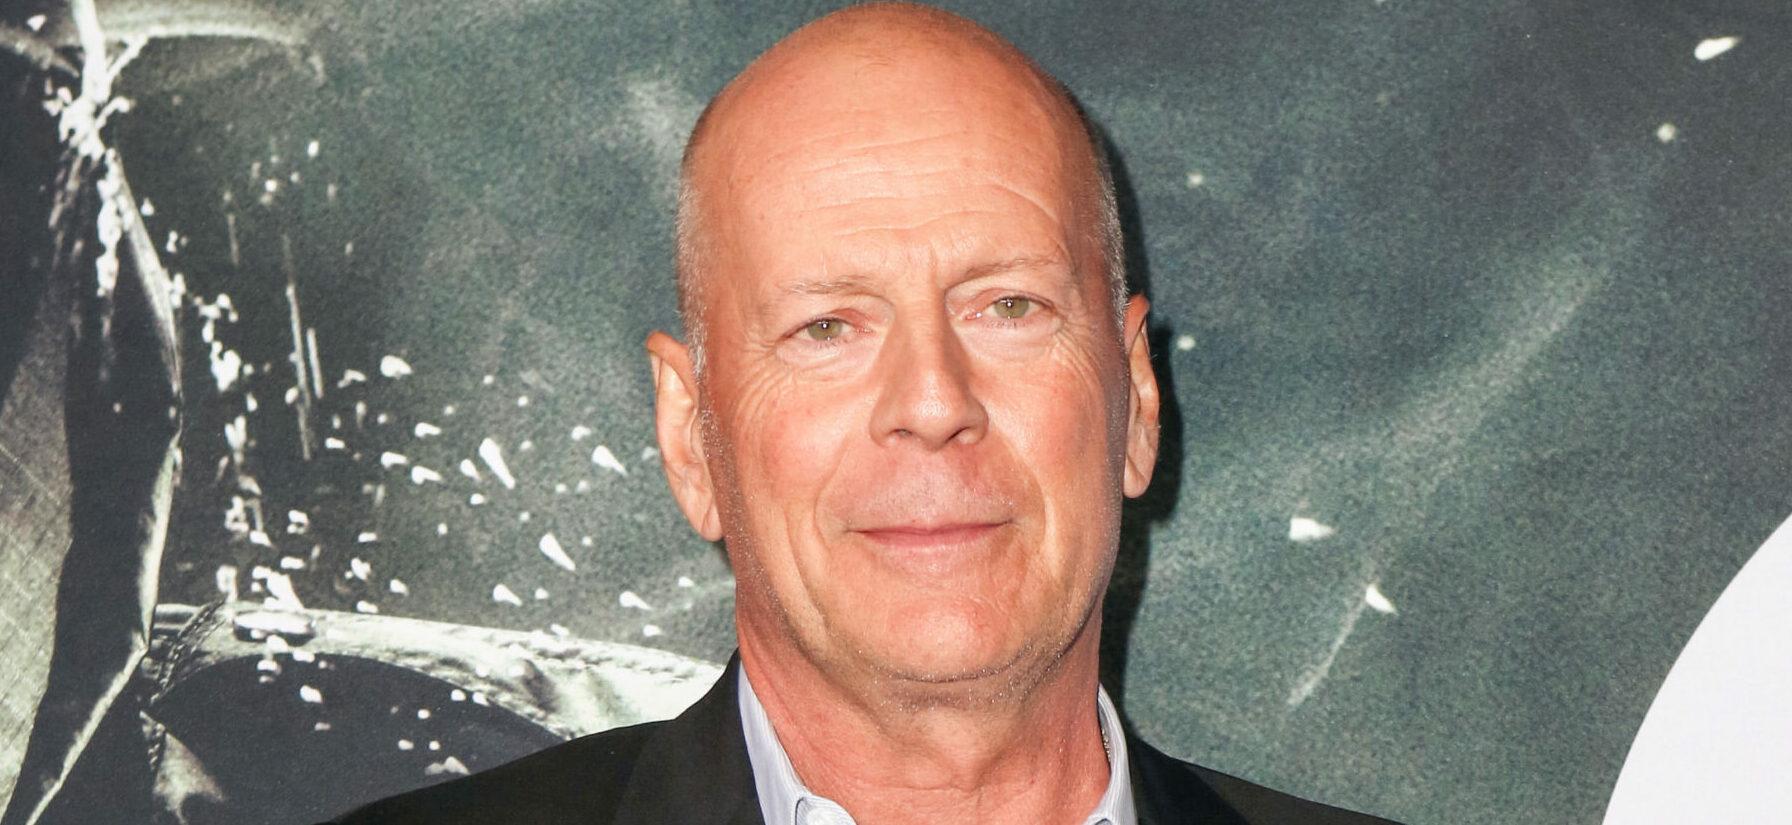 Bruce Willis At 'Glass' New York Premiere